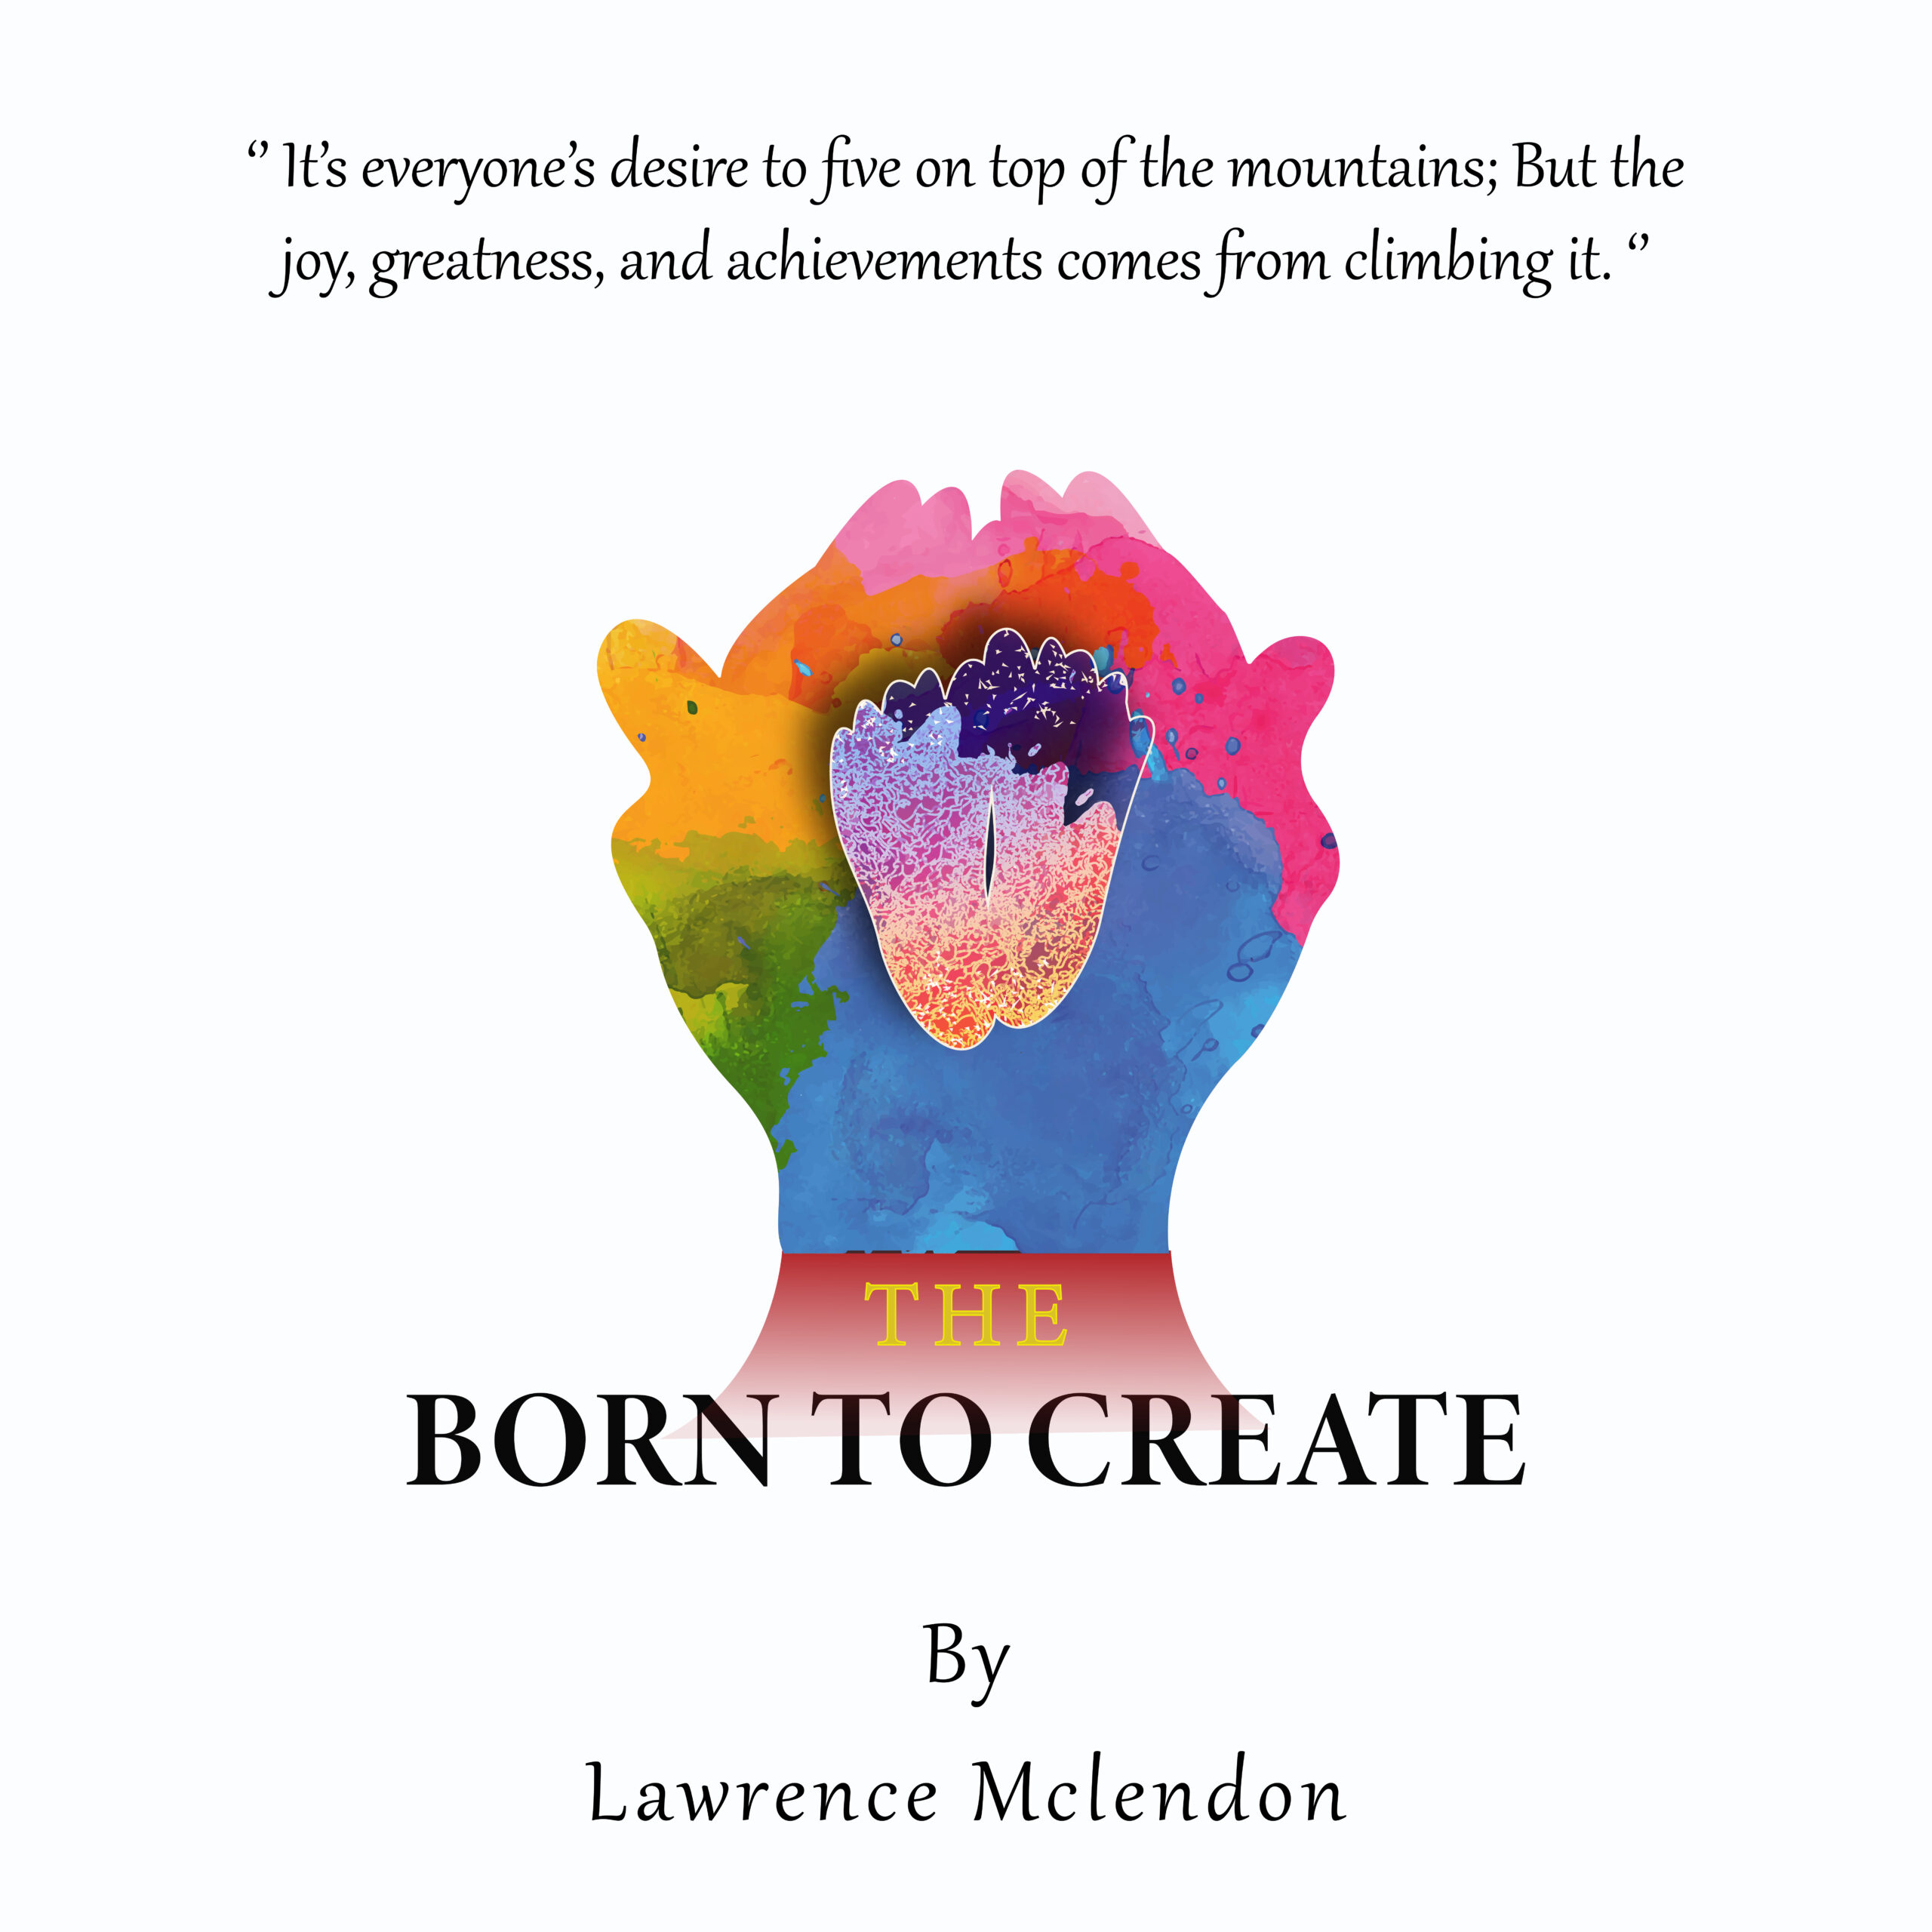 FREE: The born to create by Lawrence Mclendon